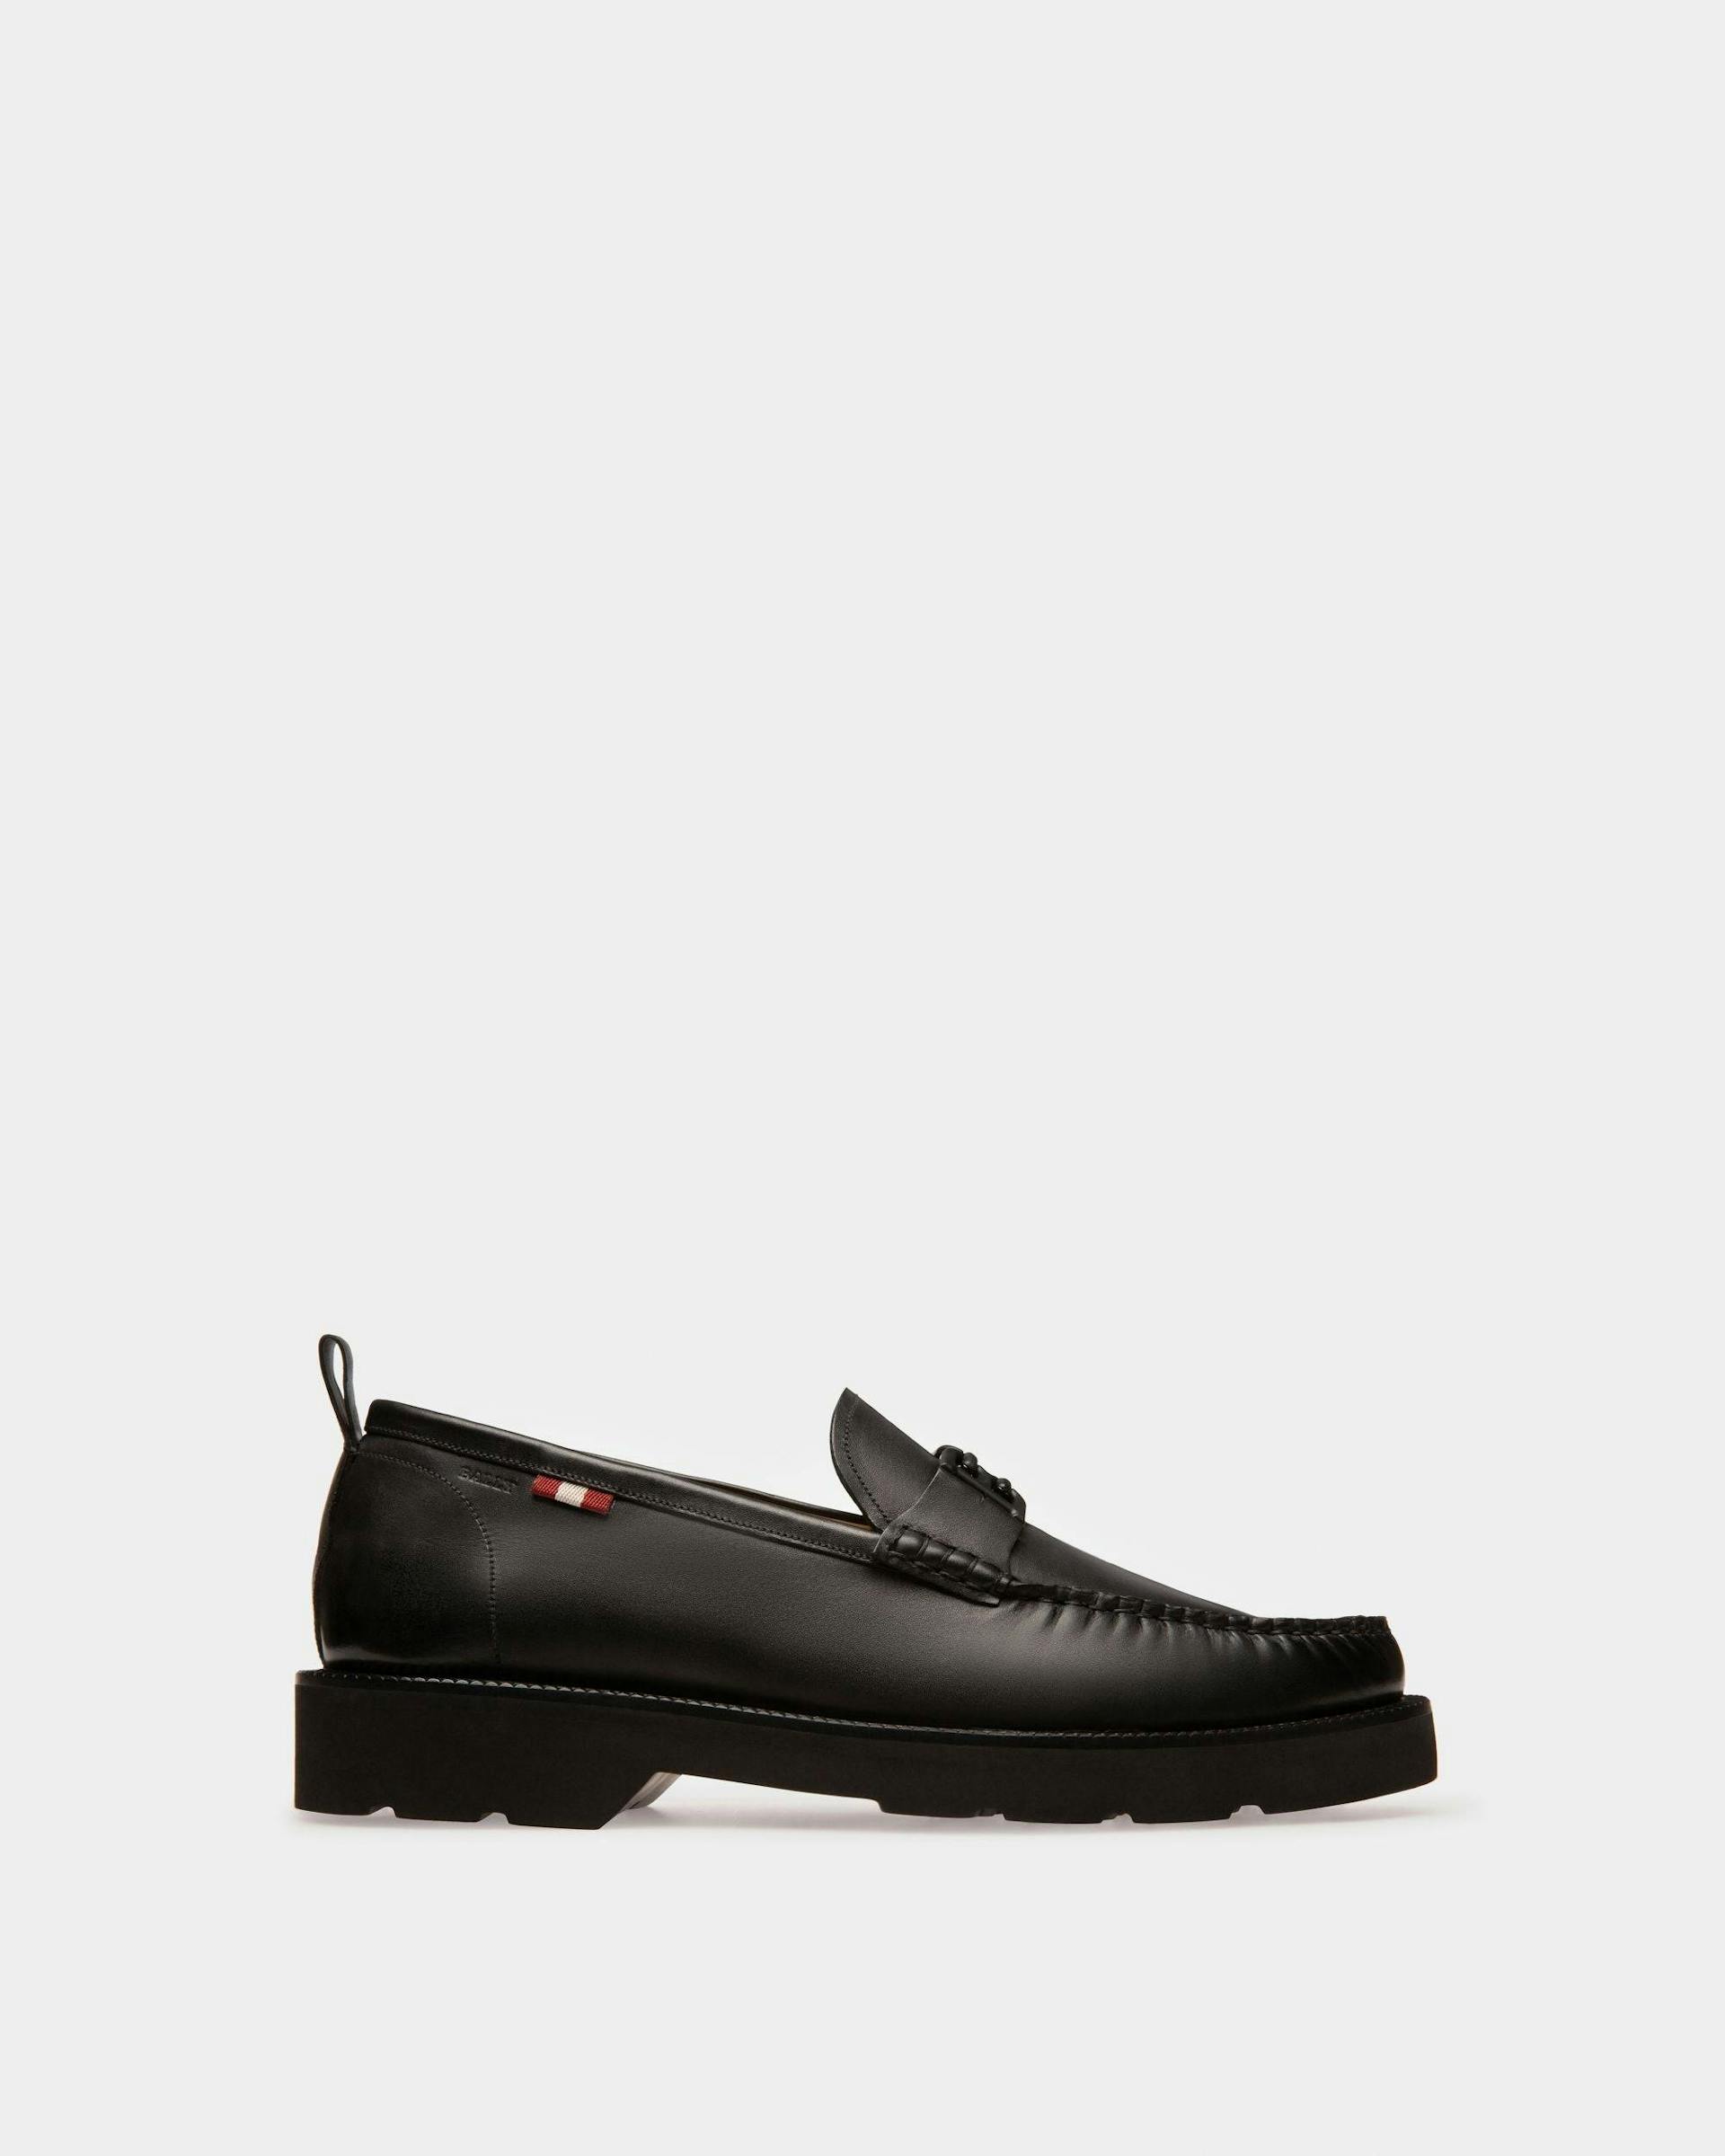 Nolam Leather Moccassins In Black - Men's - Bally - 06